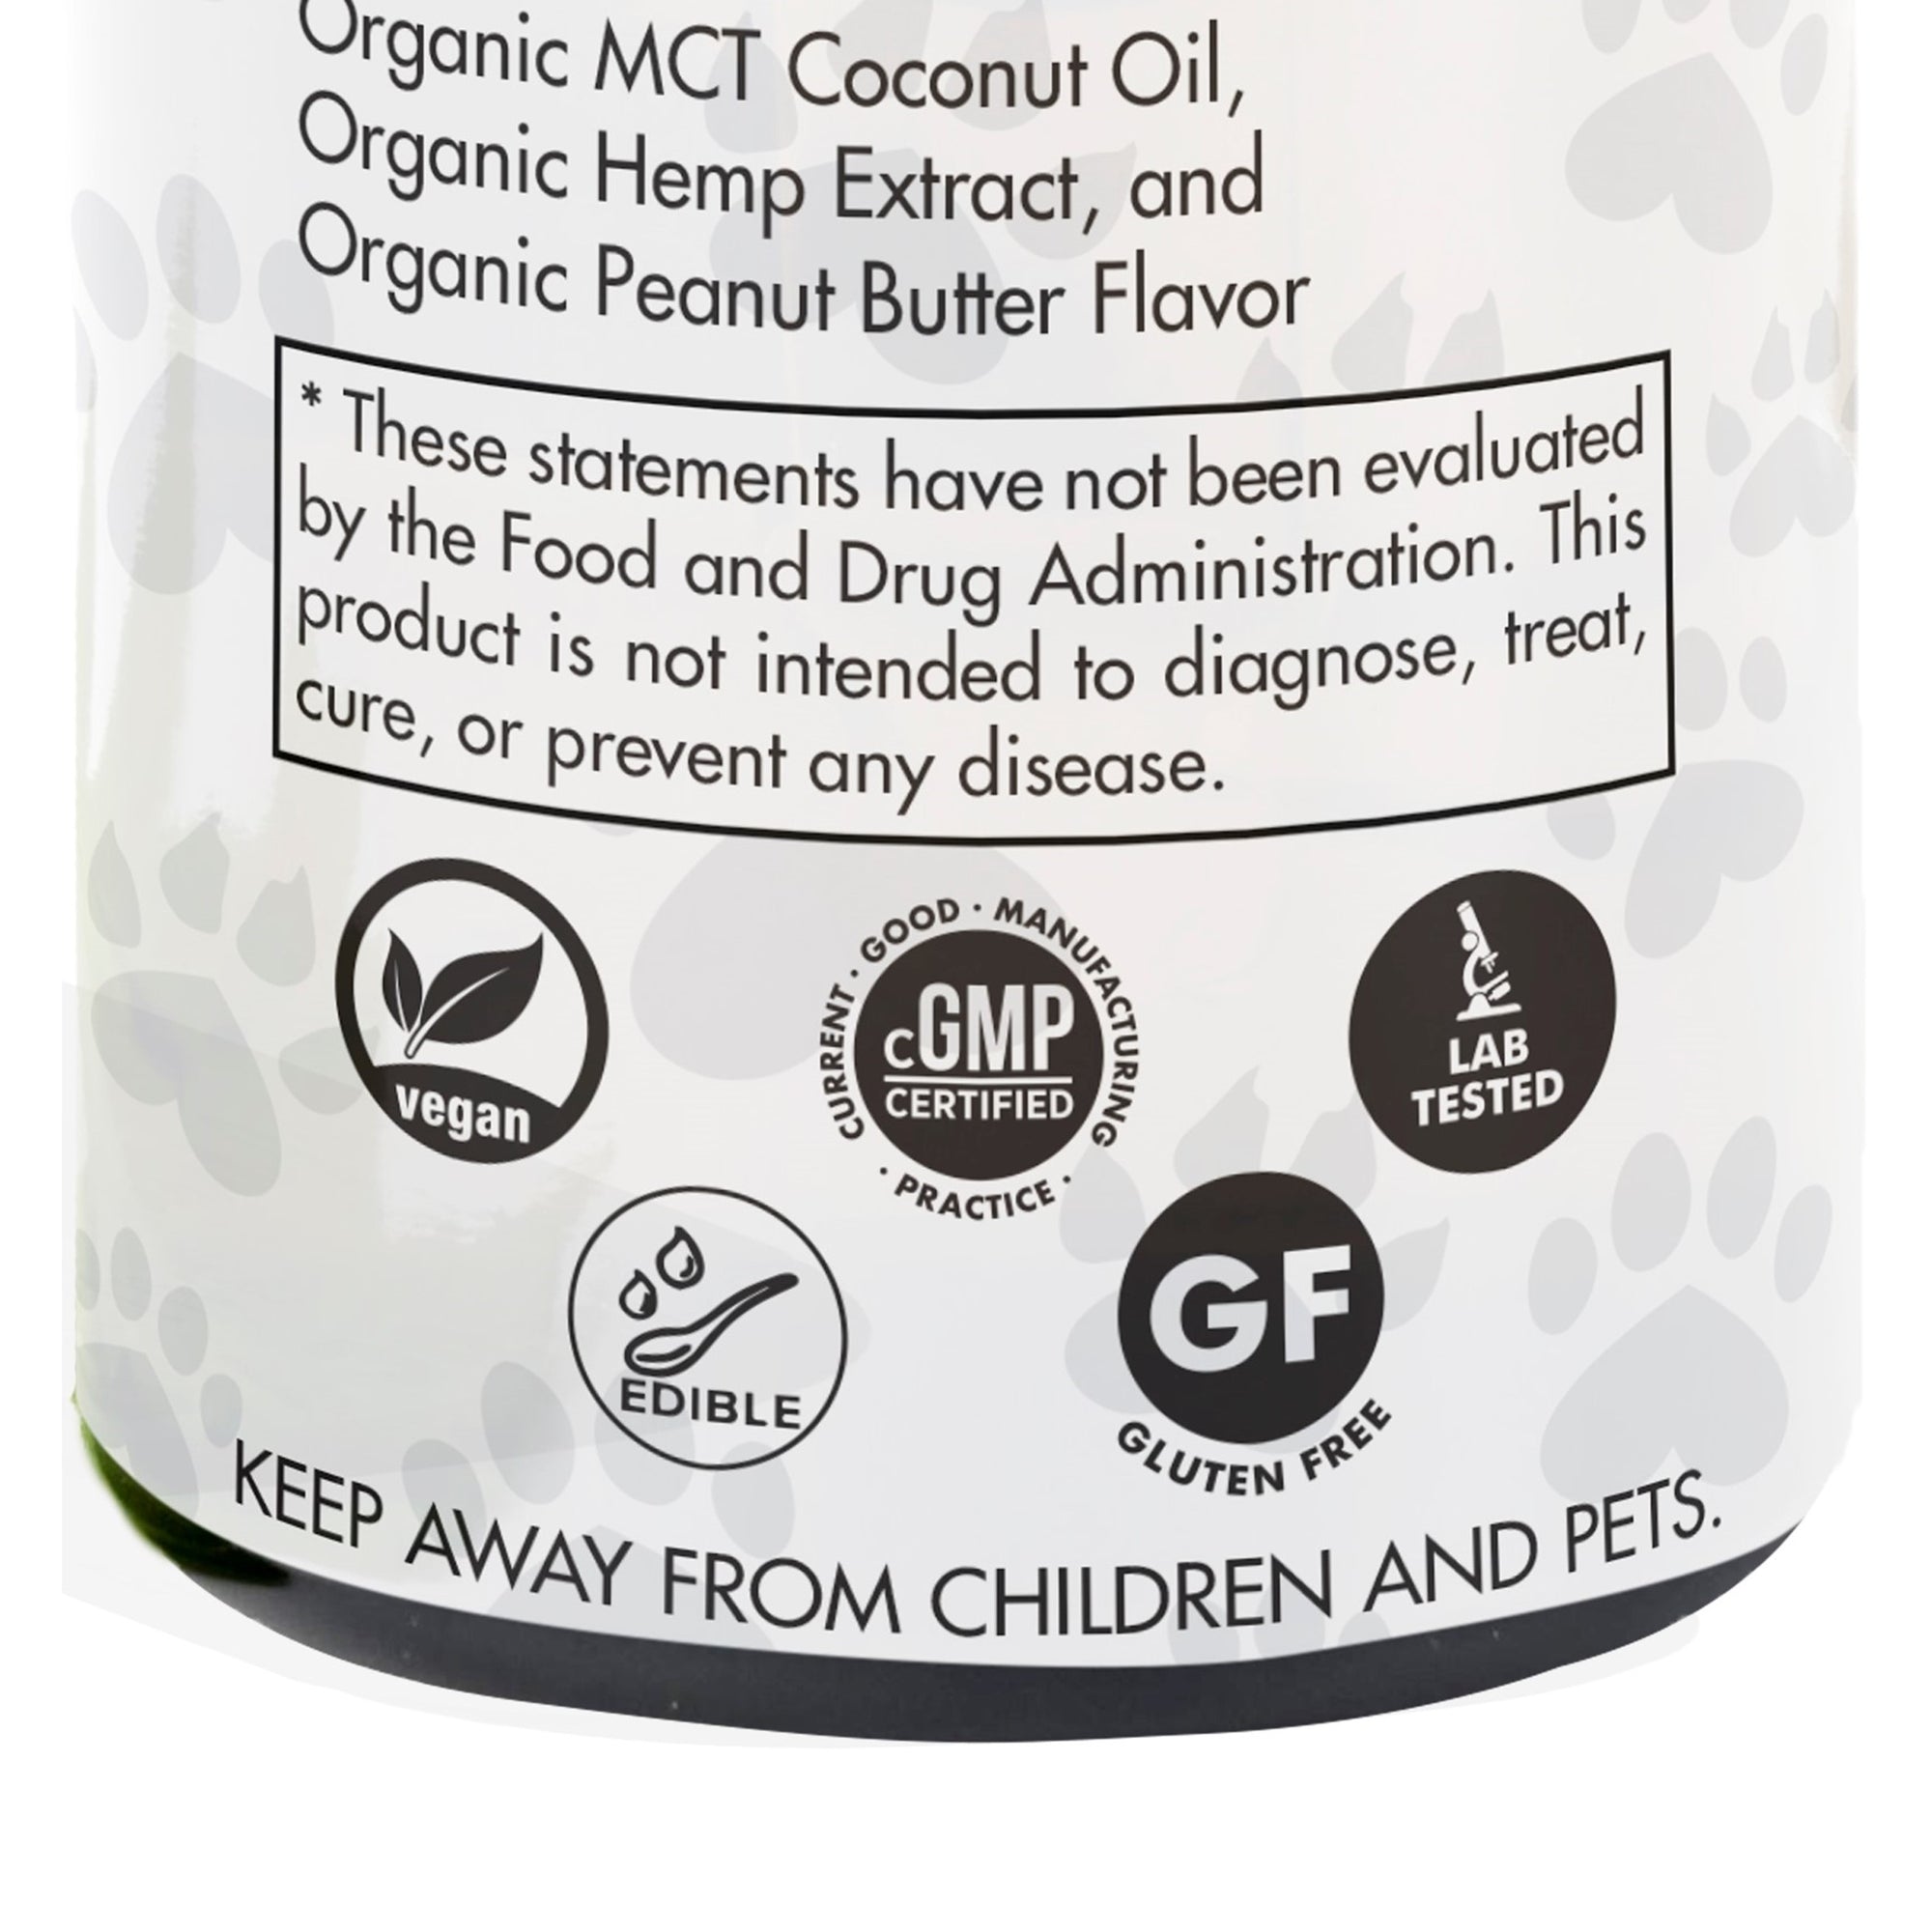 Momma Knows Best® Organics CBD oil for dogs and cats cGMP bottle seal